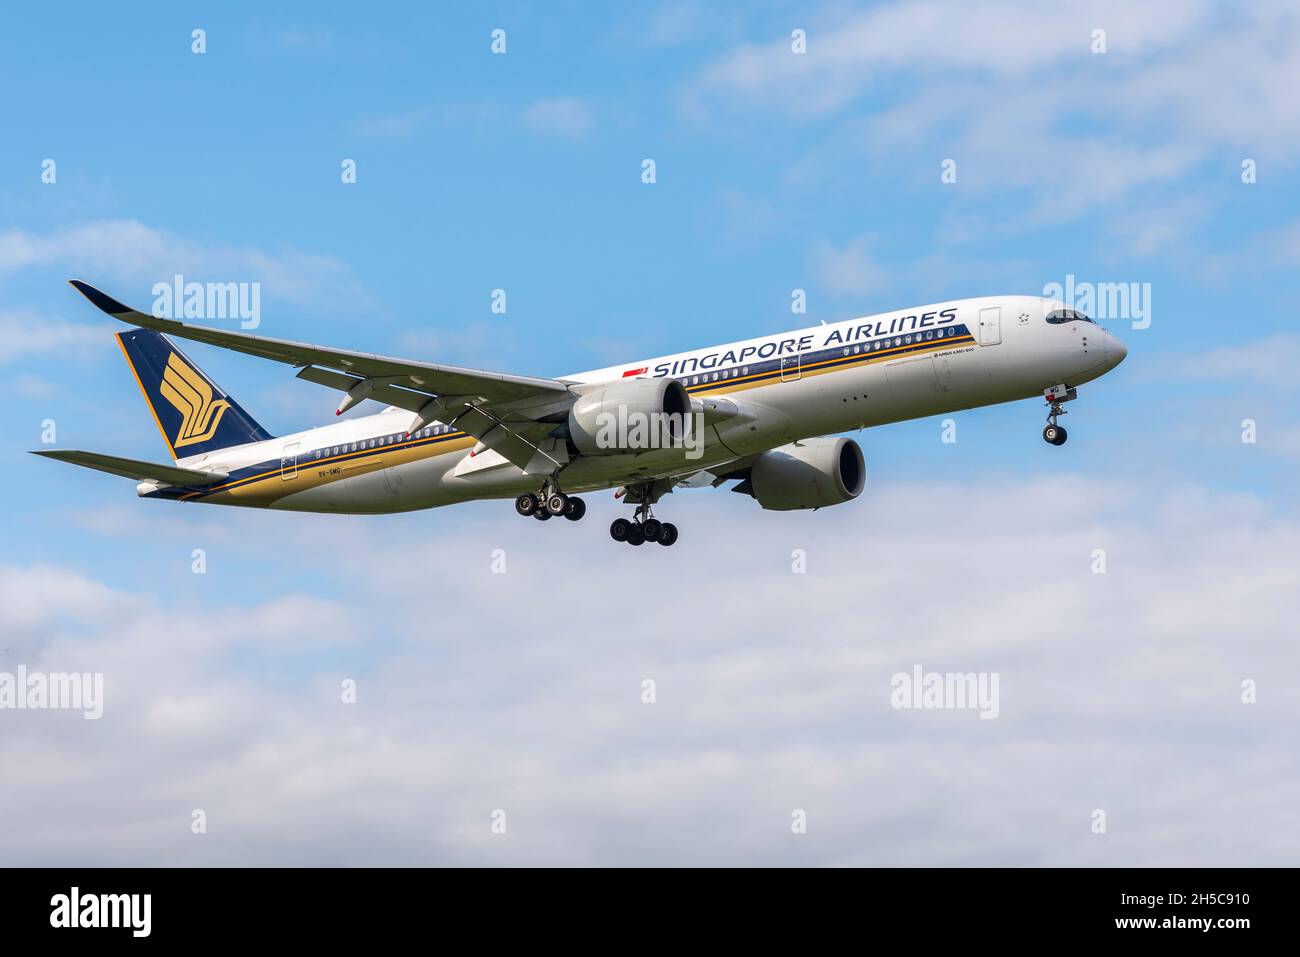 Singapore Airlines Airbus A350 airliner jet plane 9V-SMG on approach to land at London Heathrow Airport, UK. Long haul international air travel Stock Photo